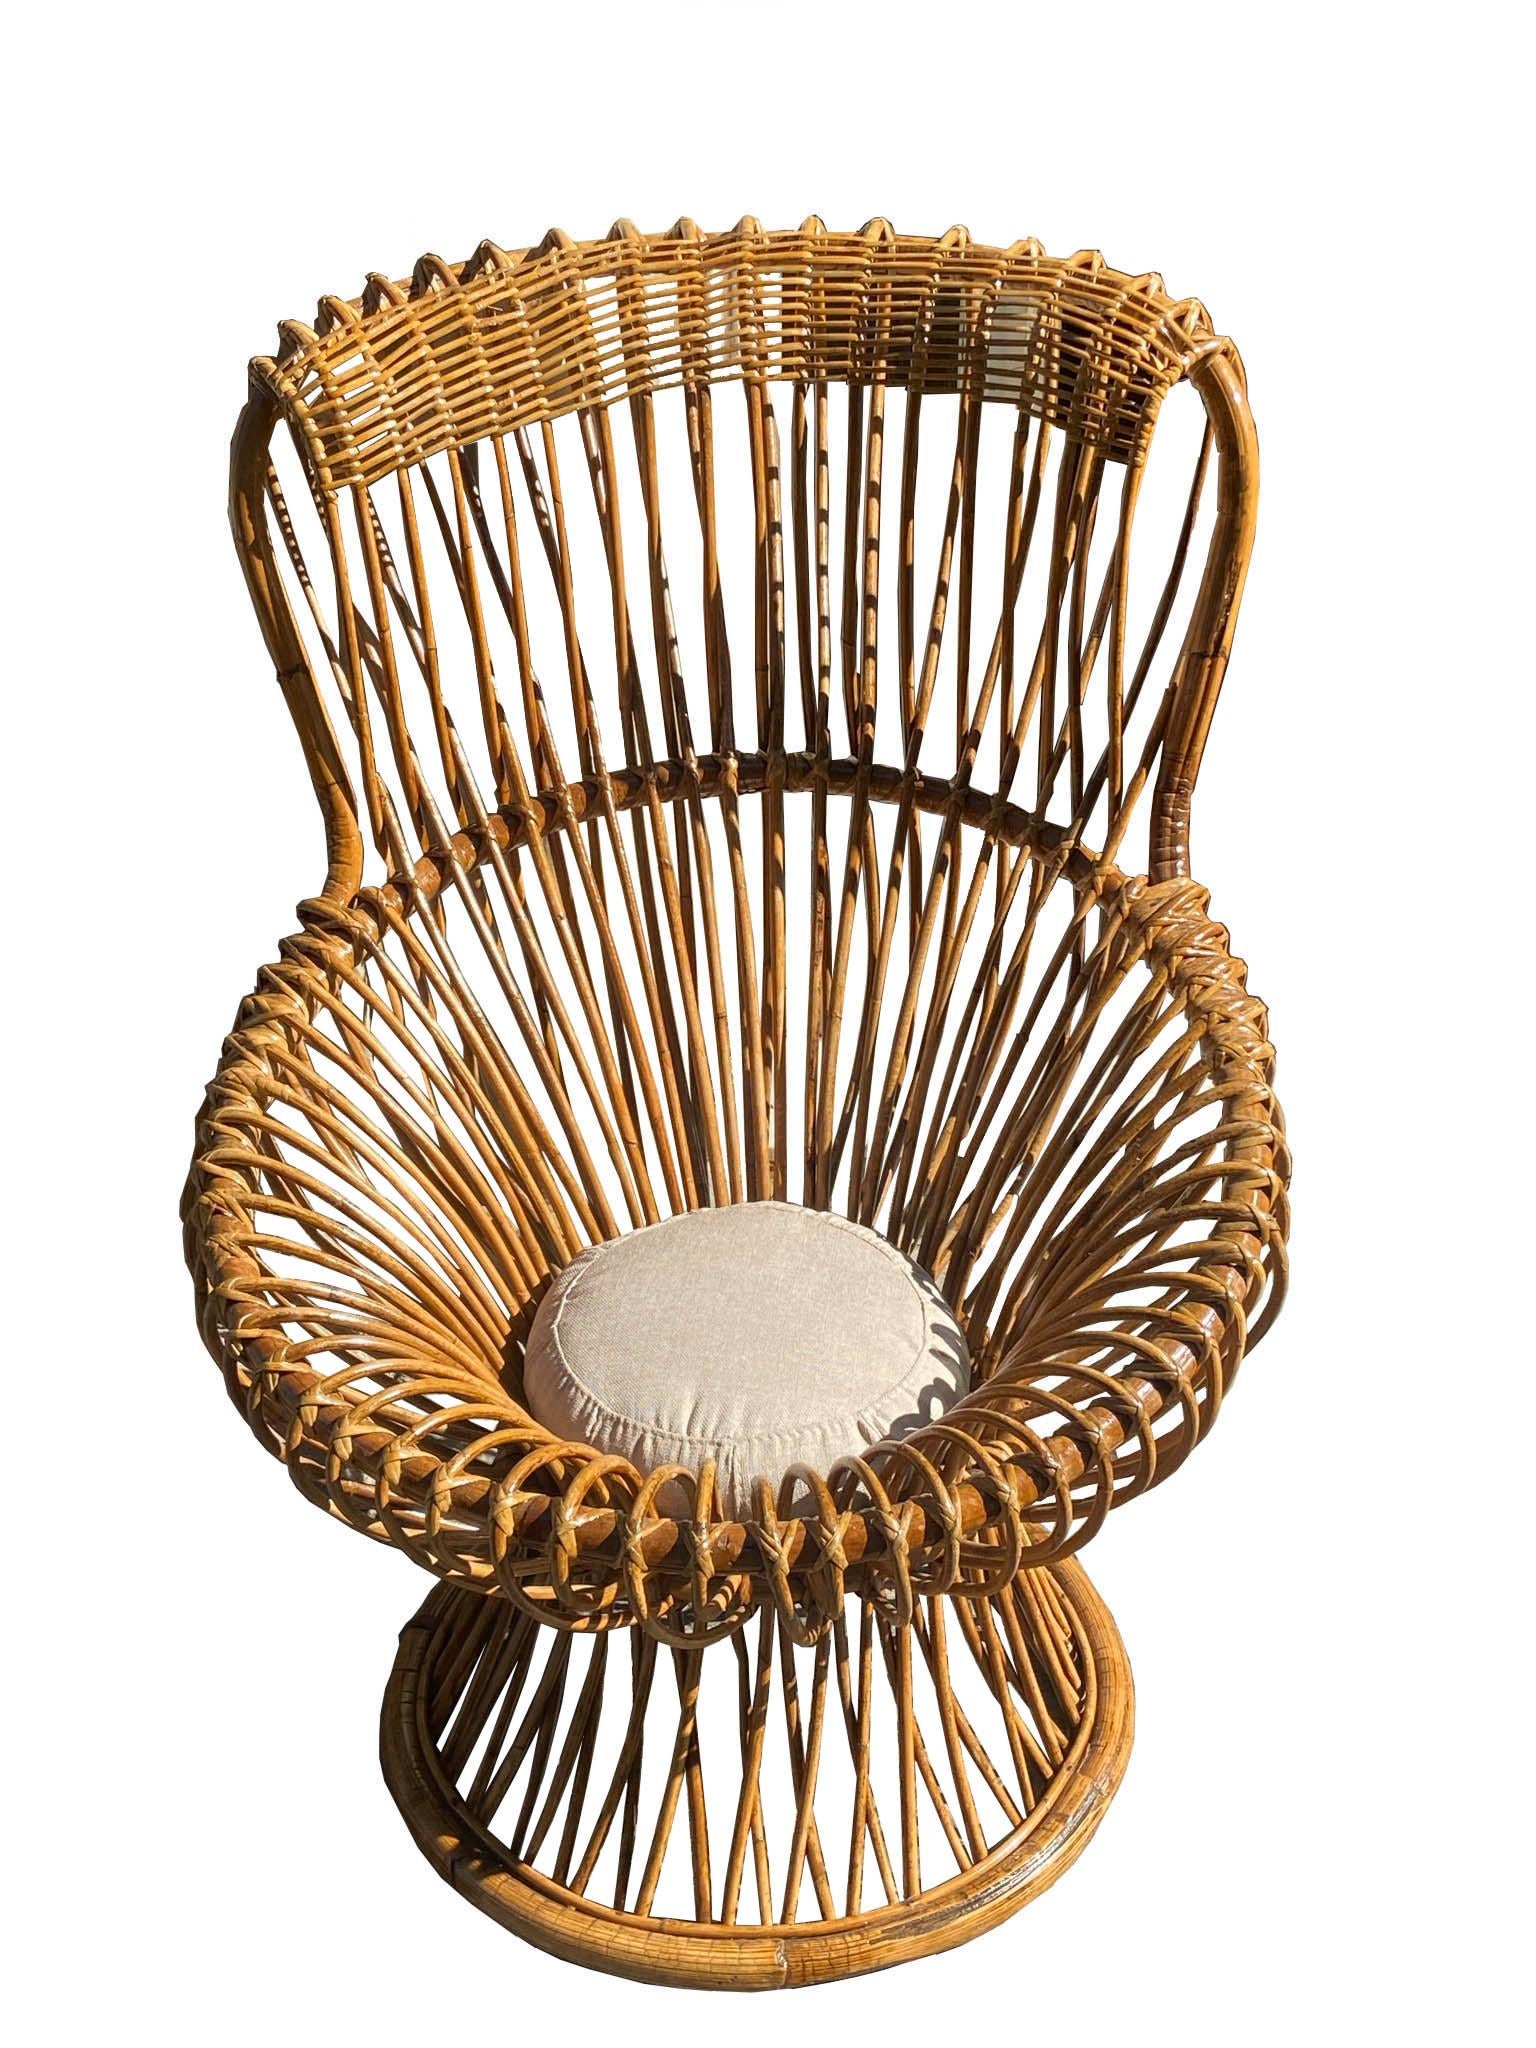 1950s Margherita chair in bamboo and rattan, designed by Franco Albini for Vittorio Bonacina, with cushion. Casual but elegant, the Margherita chair received the gold medal at the 9th Milan Triennale.
 